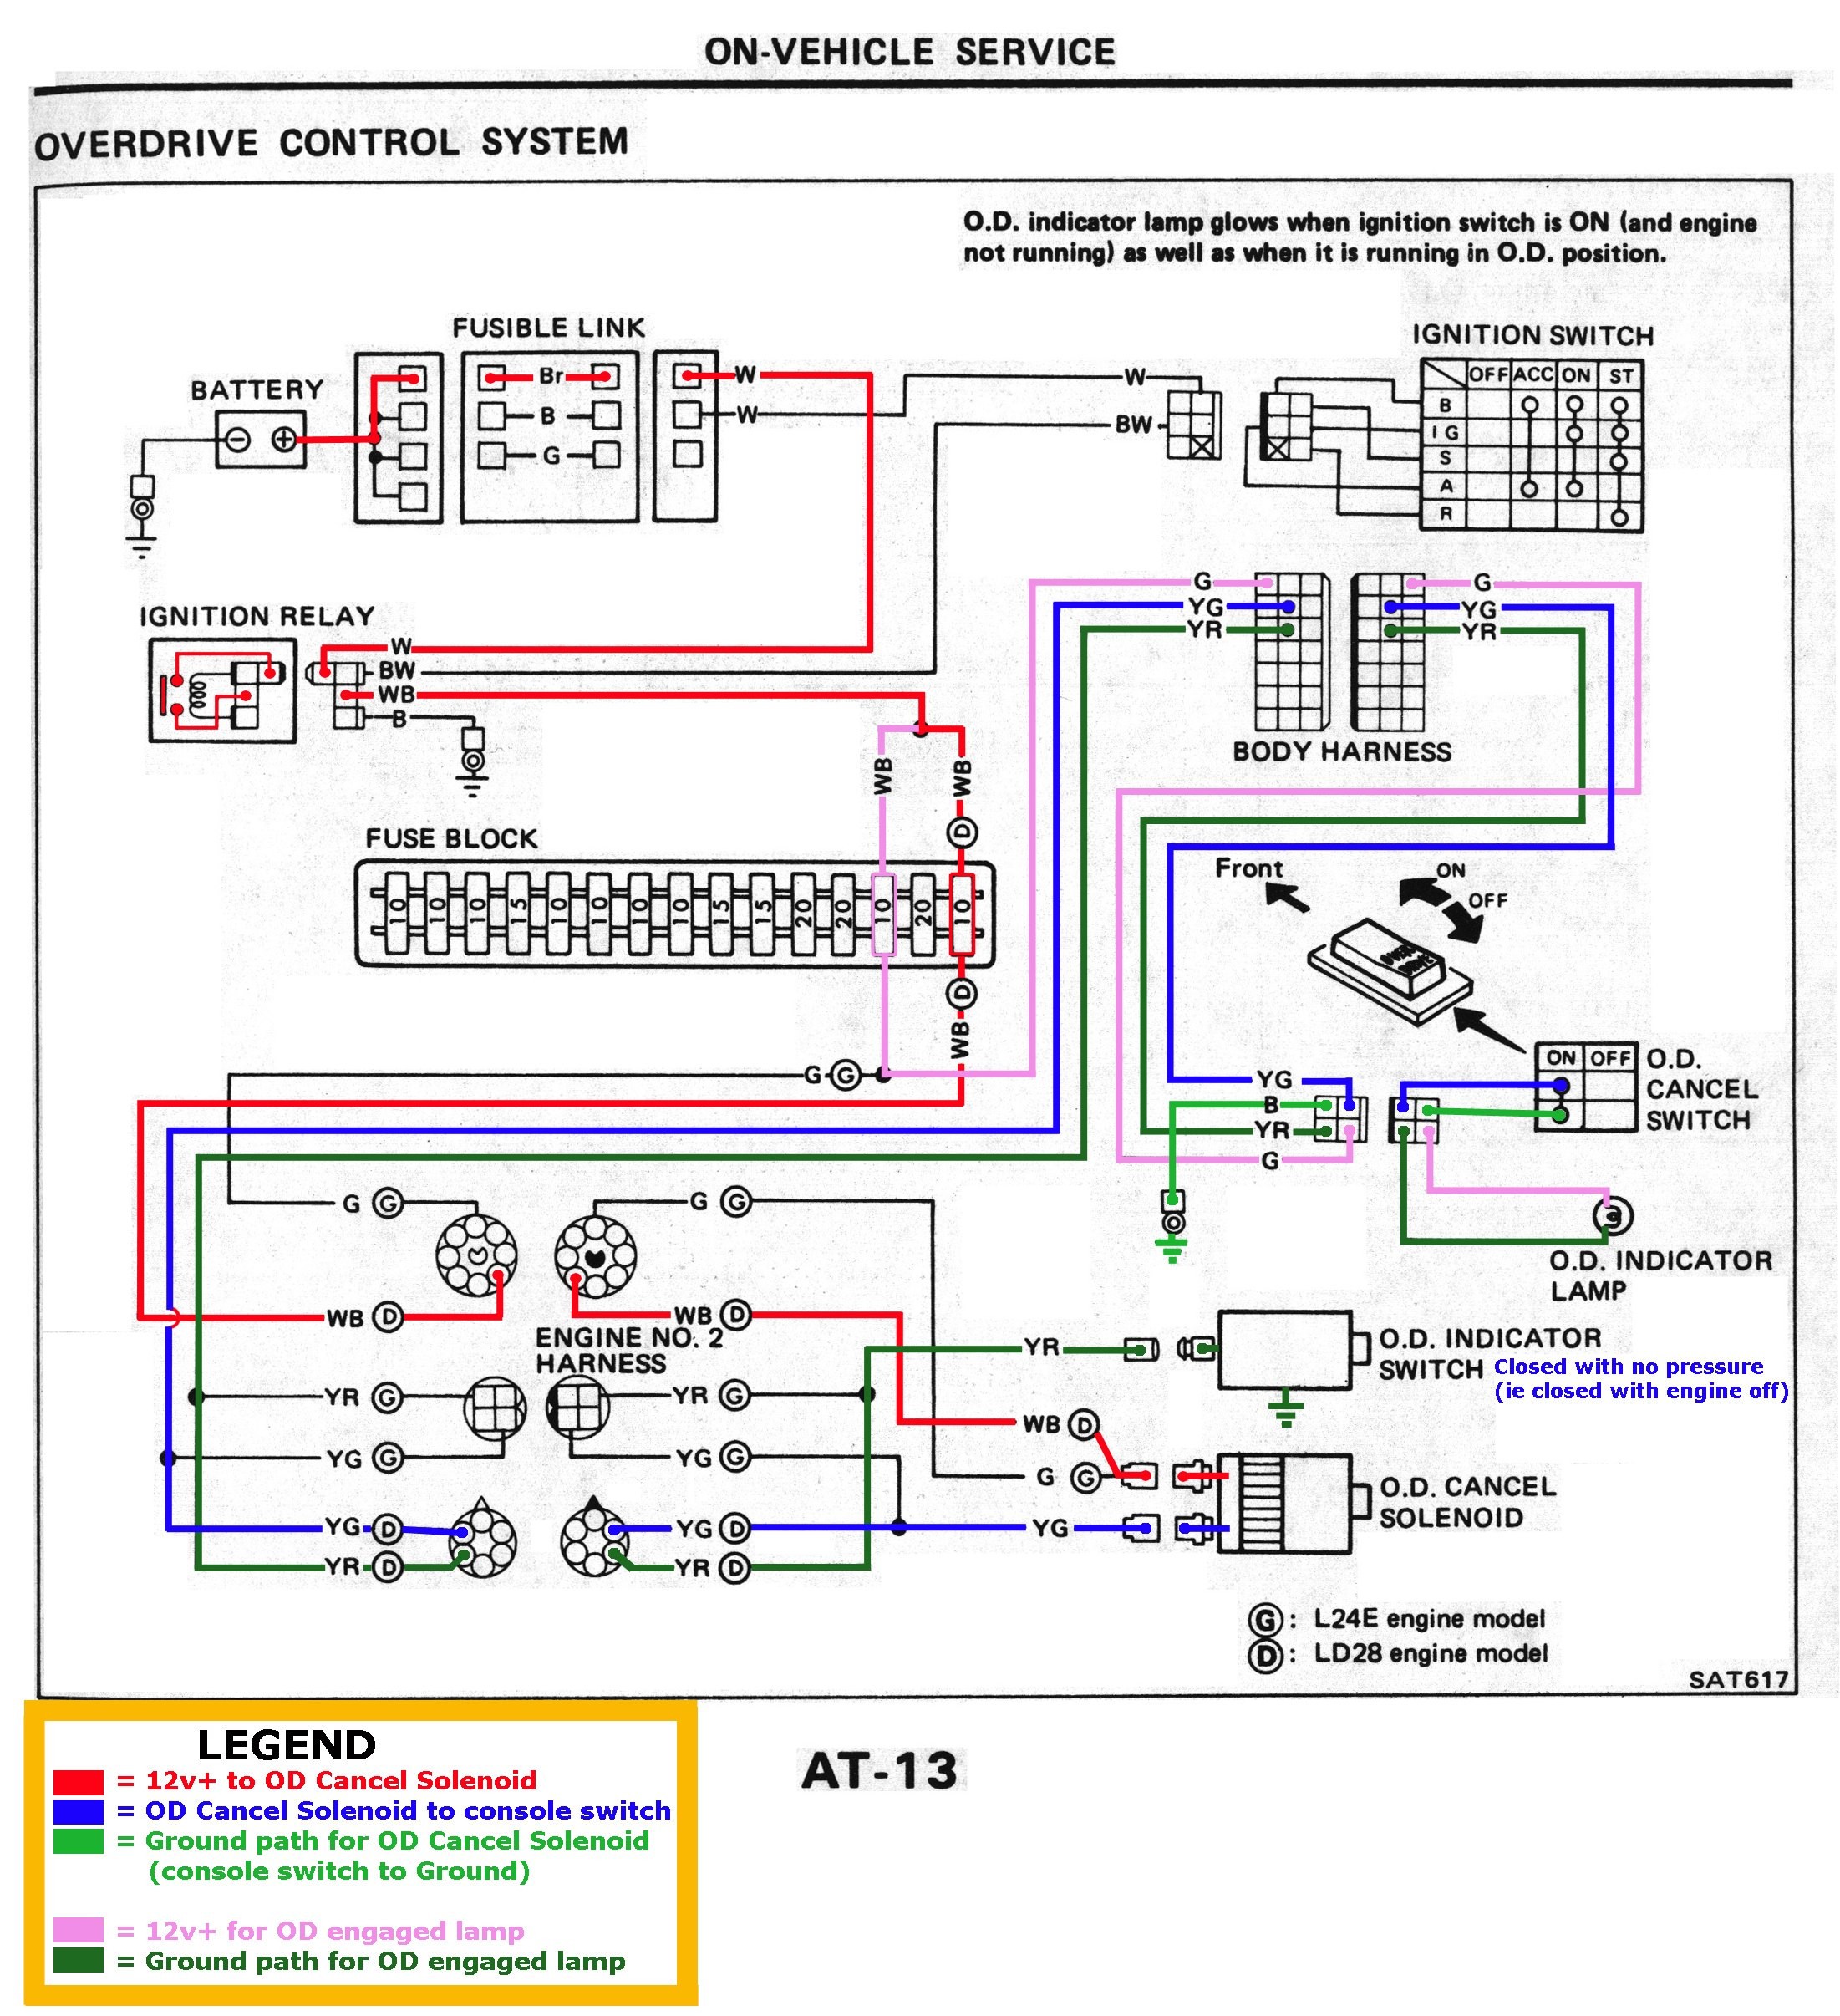 2001 Lincoln town Car Fuse Box Diagram How to Wire A Fuse Box Diagram Electrical Circuit 2001 ford F150 Of 2001 Lincoln town Car Fuse Box Diagram